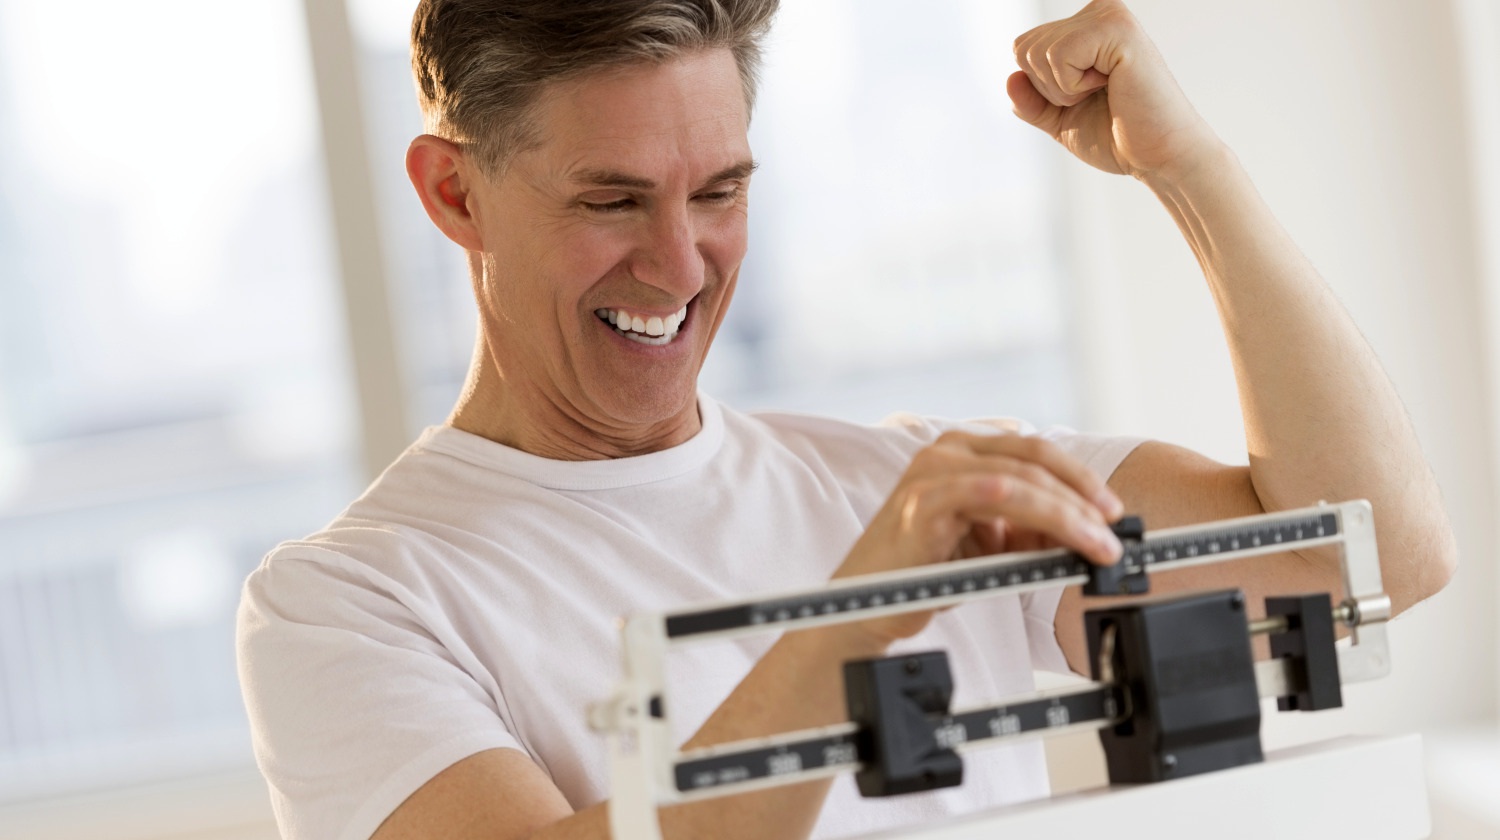 Featured | Excited mature man clenching fist while using balance weight scale at gym | The Importance of the NO CARB SNACKS Rule if You Want Weight Loss